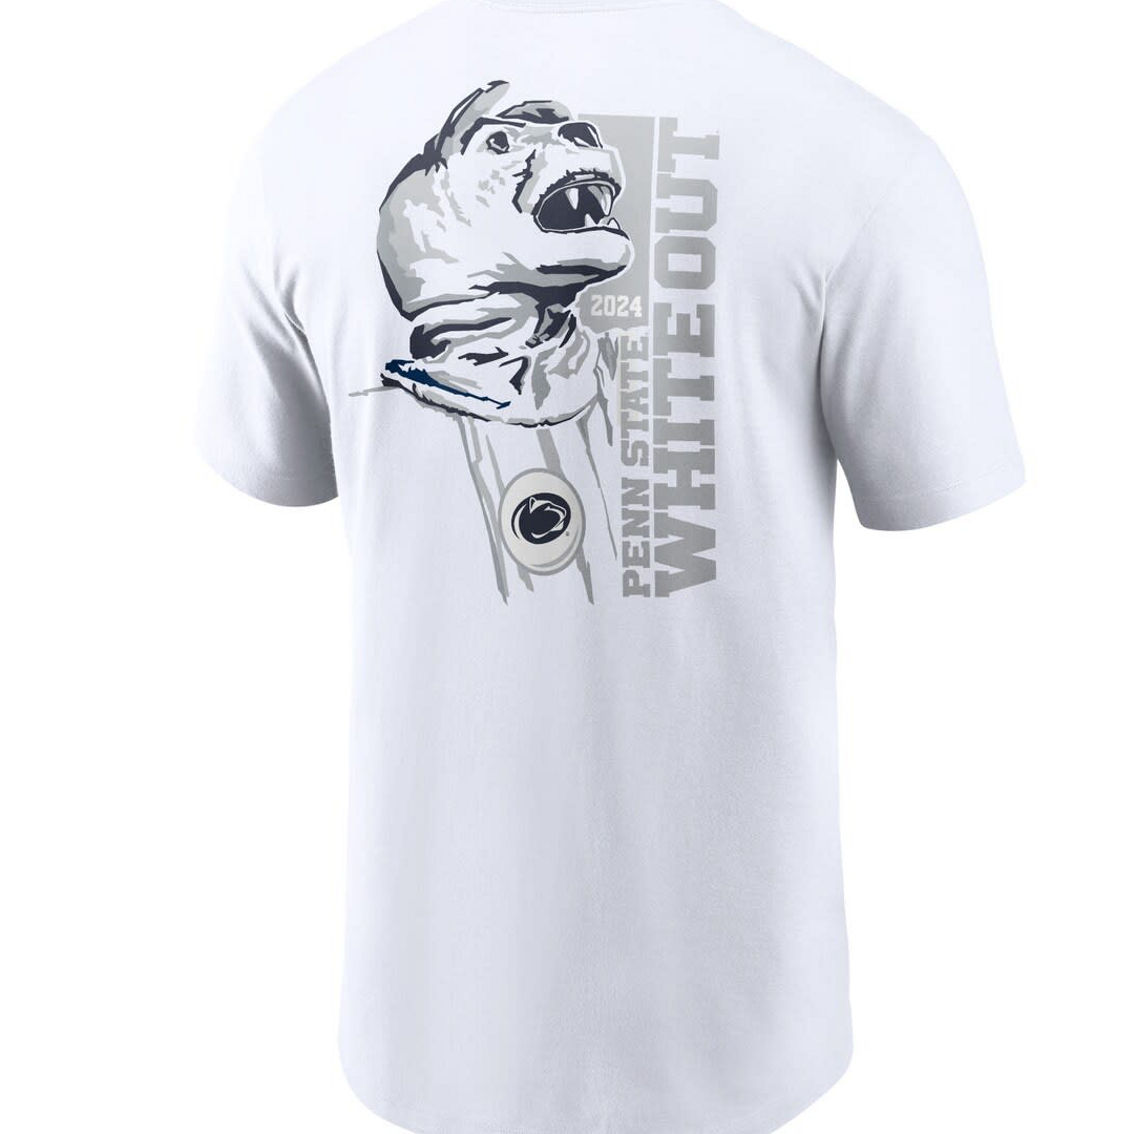 Nike Men's White Penn State Nittany Lions 2024 White Out T-Shirt - Image 4 of 4